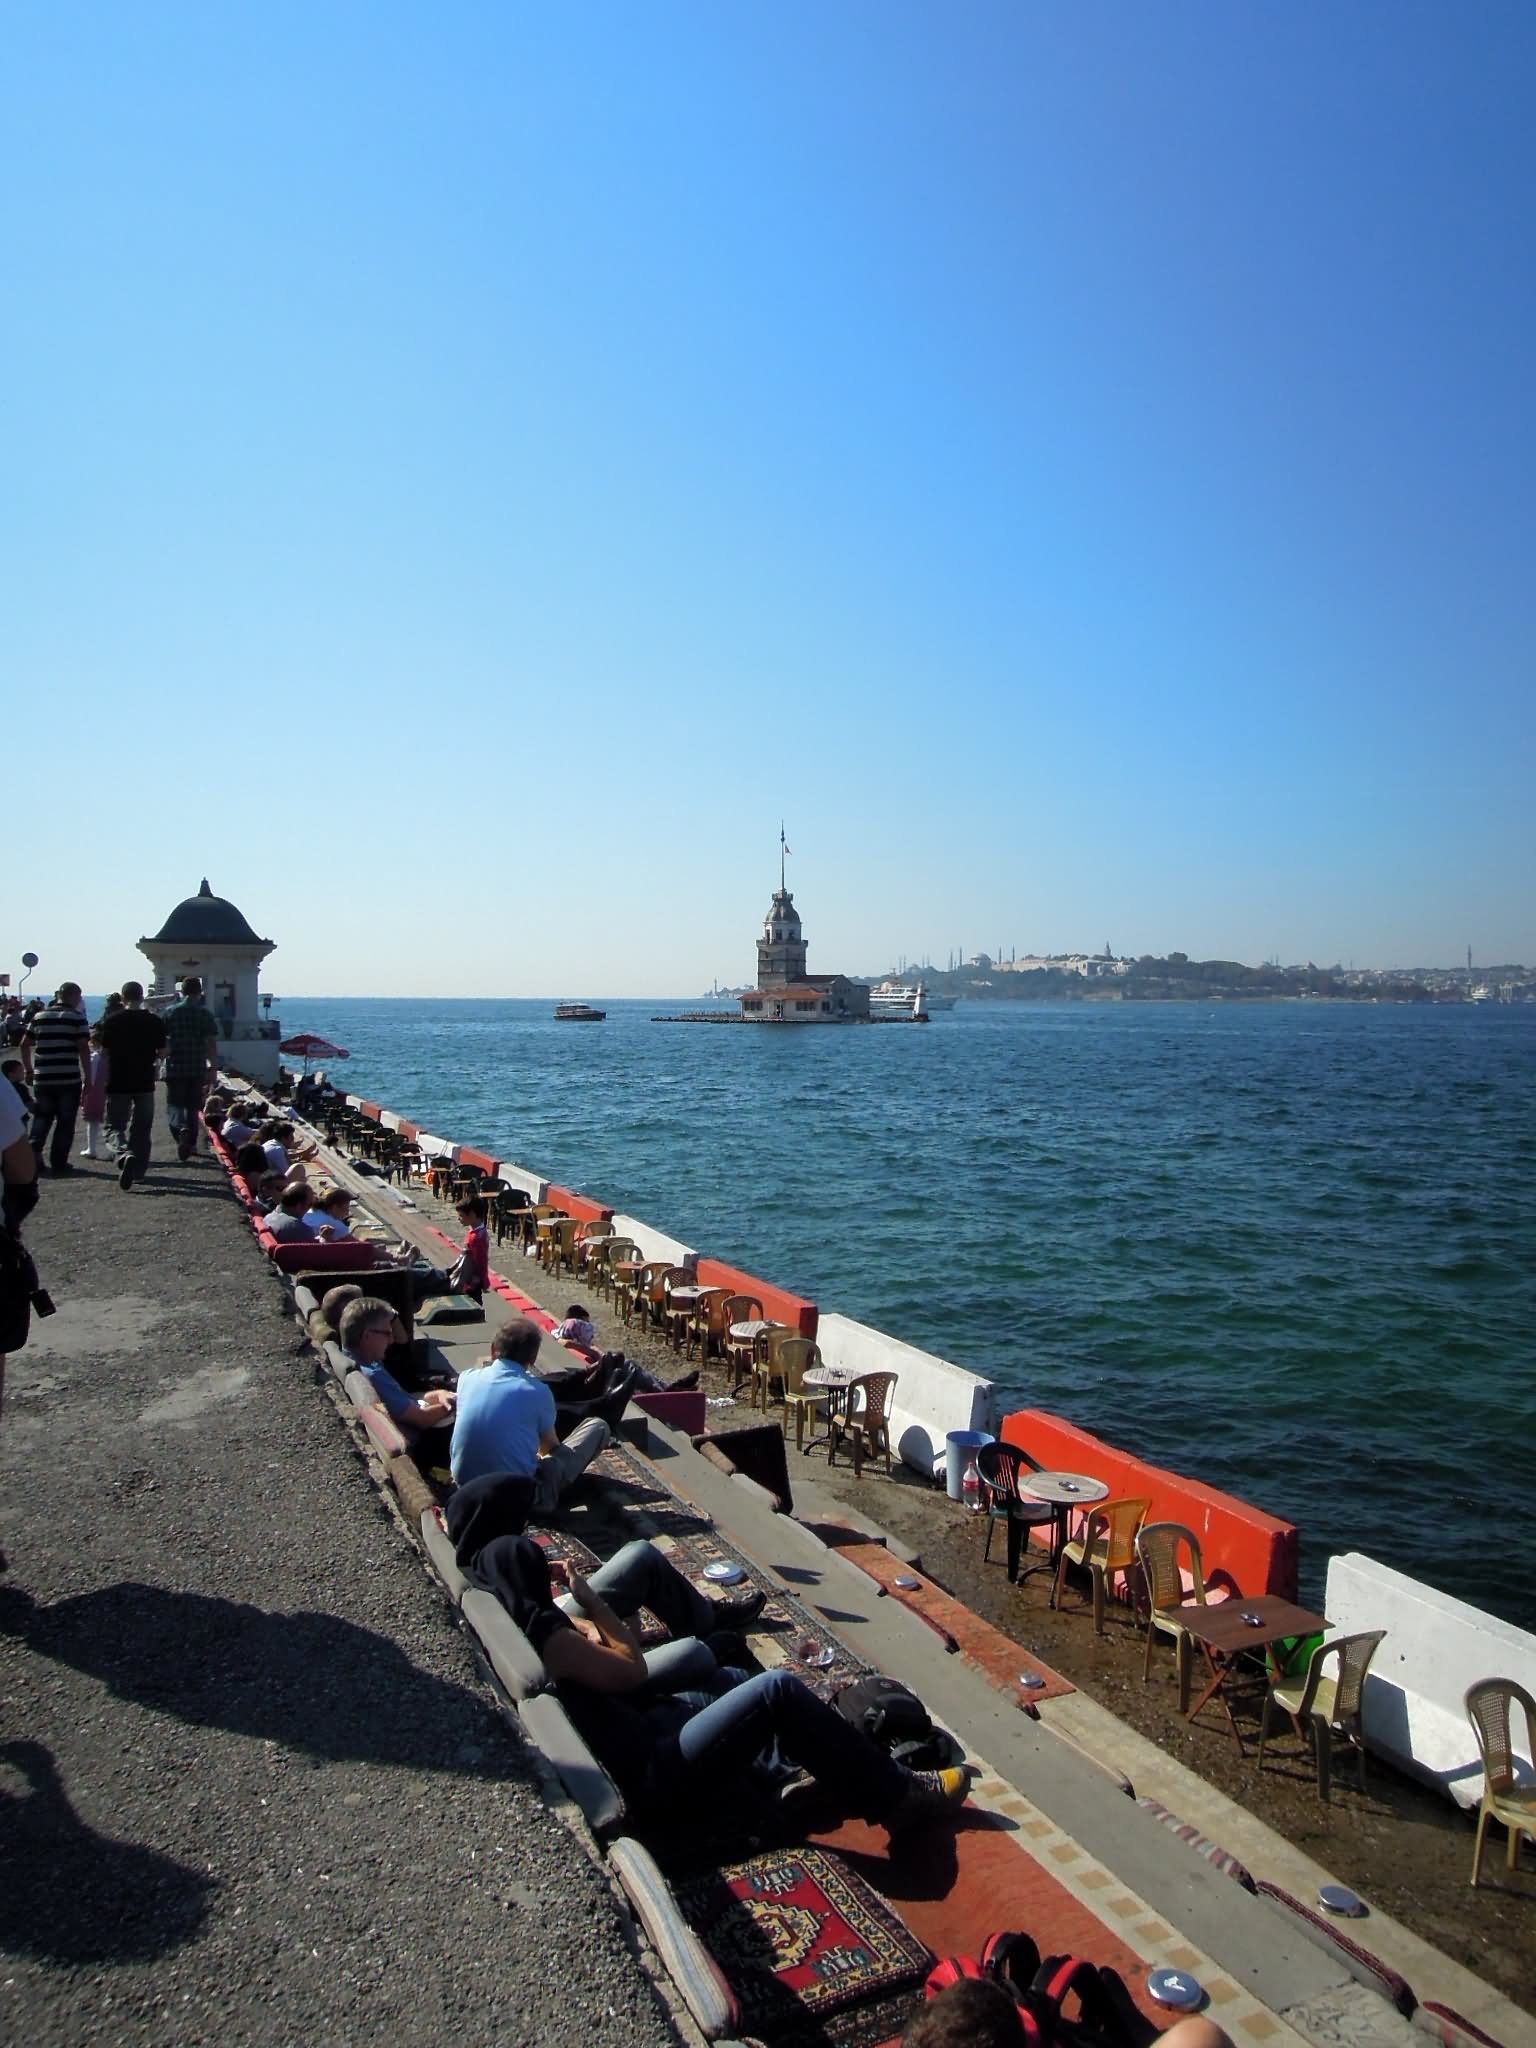 Along The Walkway To The Maiden's Tower In Istanbul